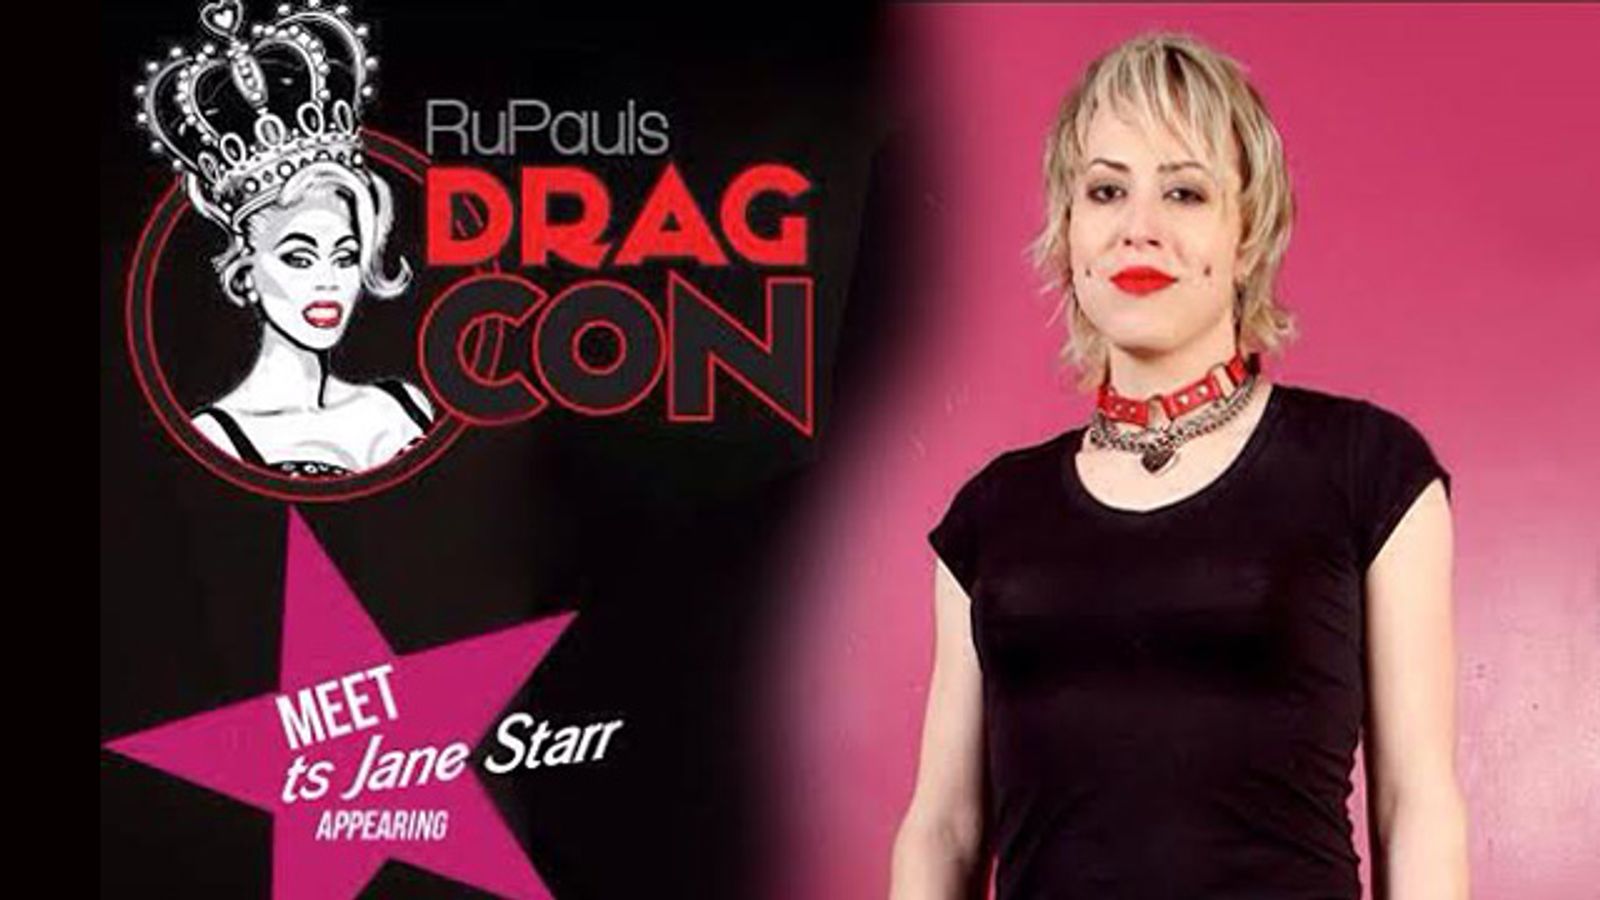 TS Performer Jane Starr to Appear at DragCon This Weekend